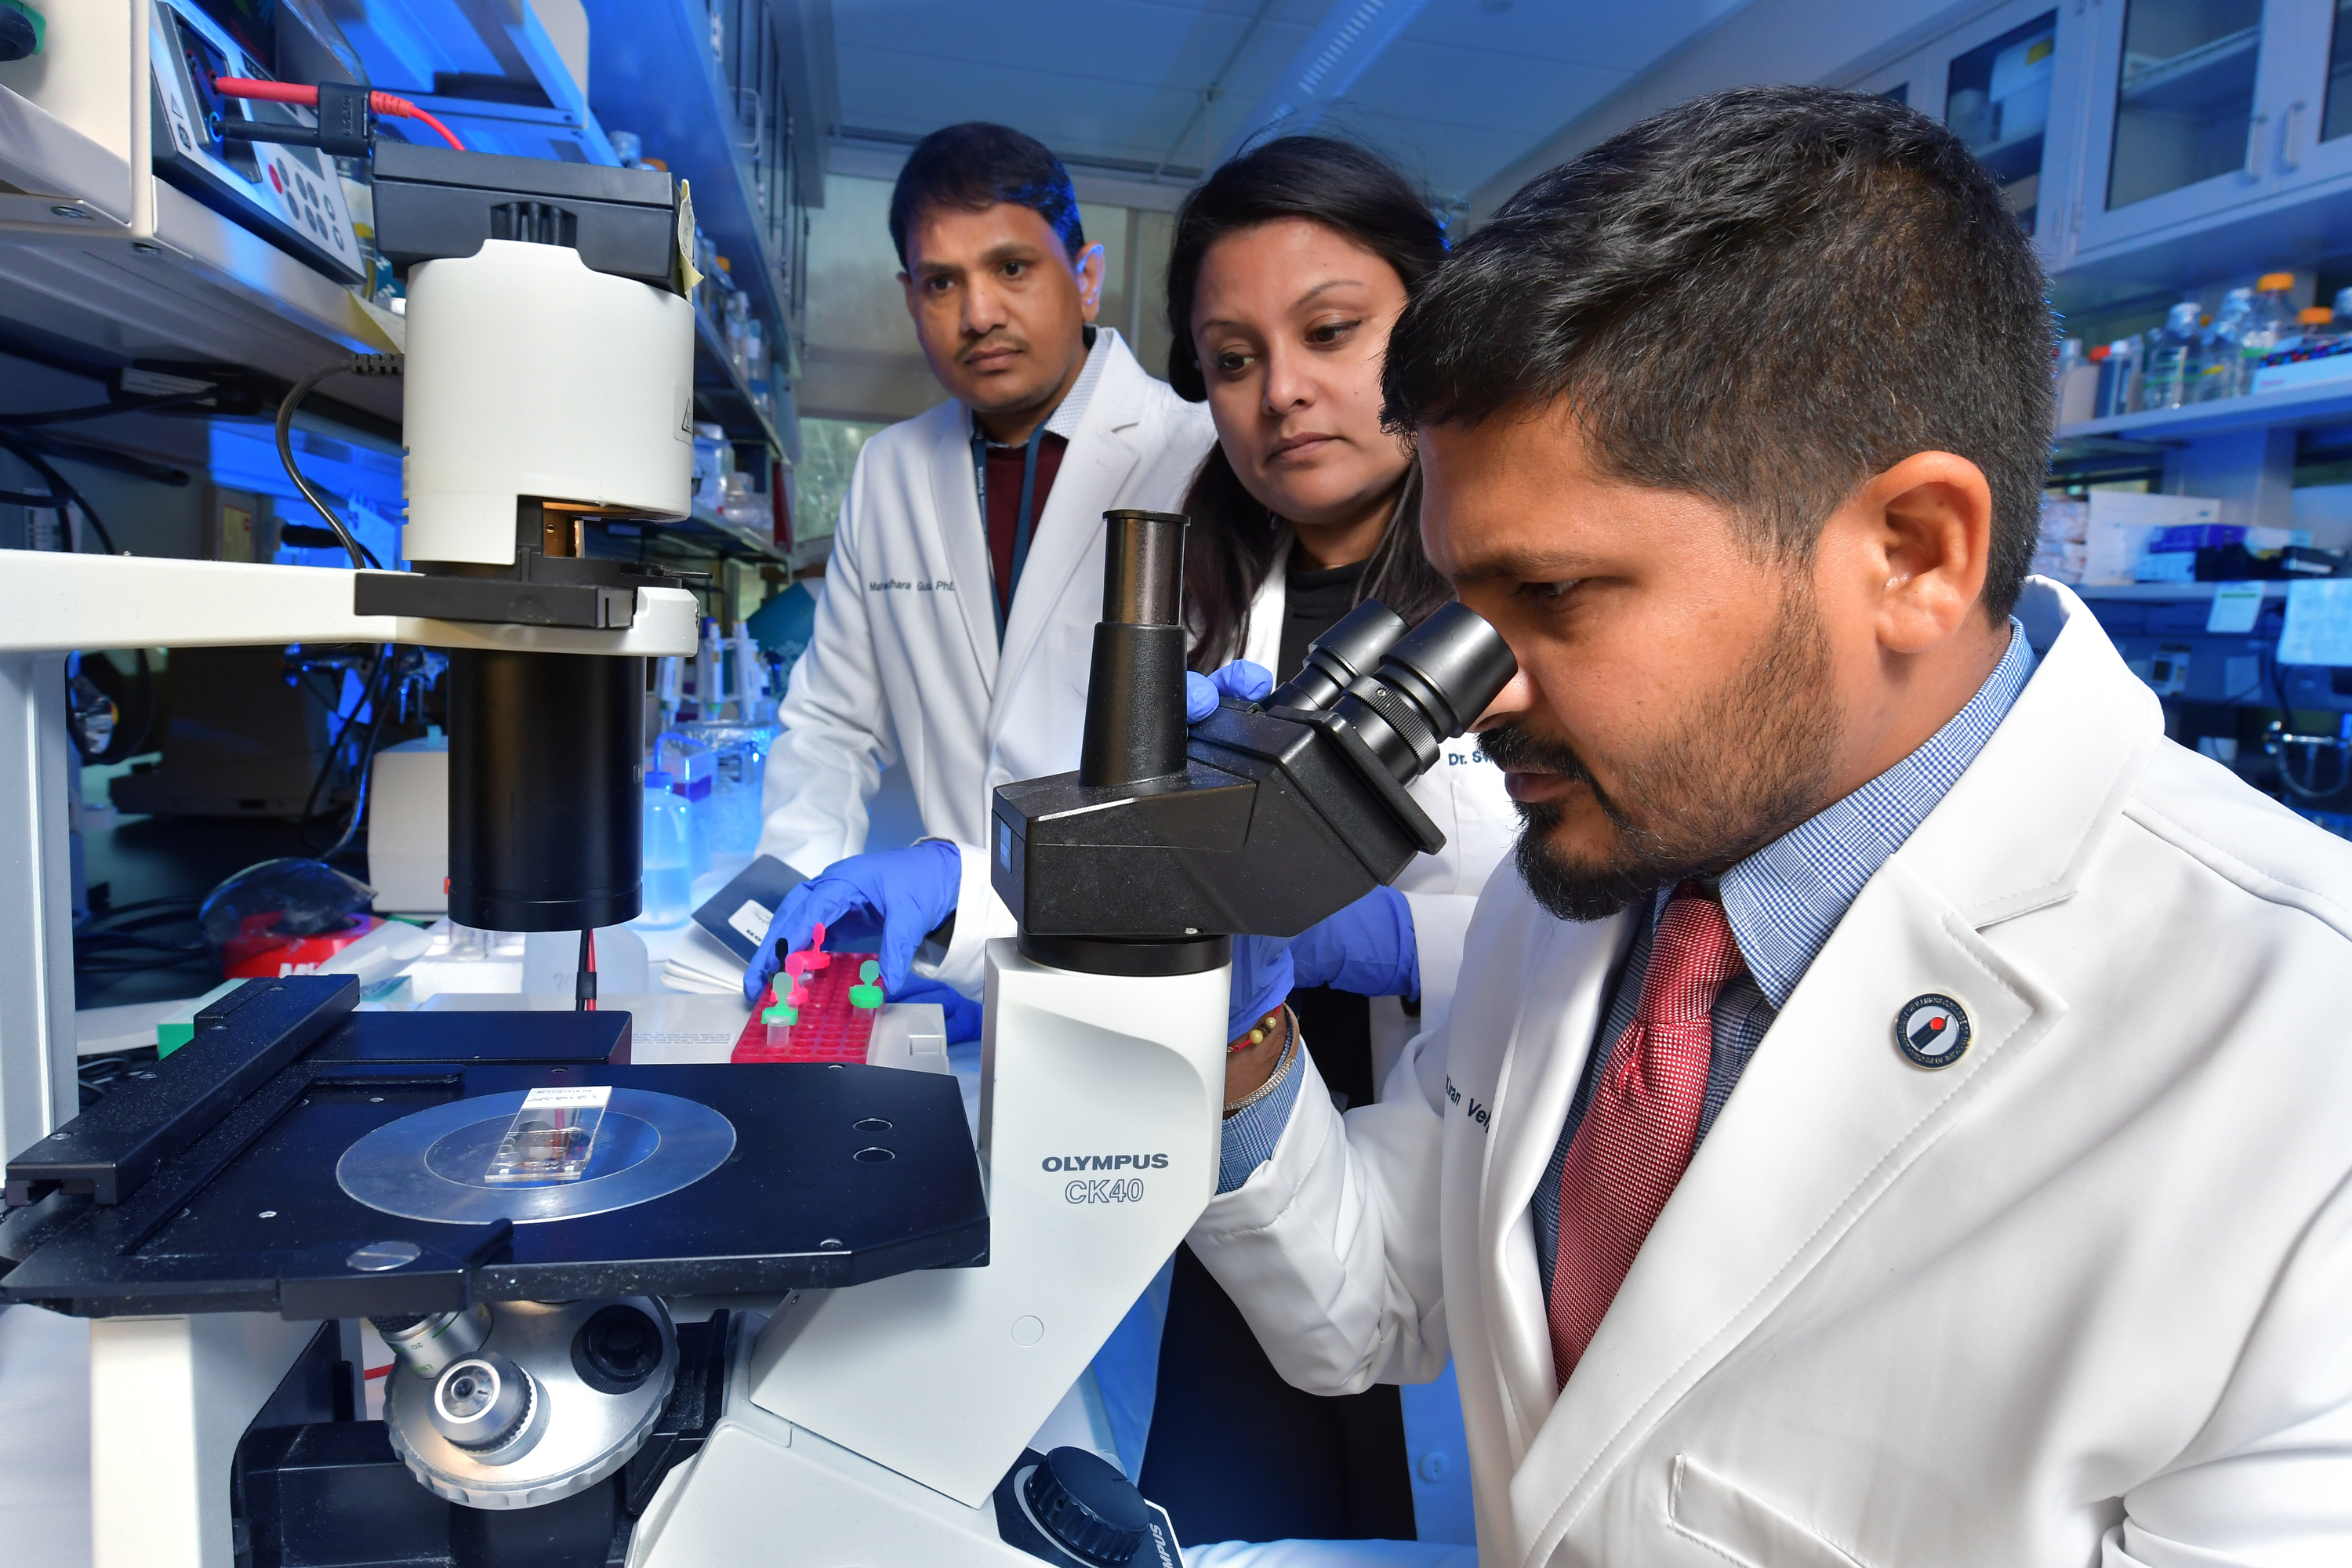 Dr. Kiran Velpula of the University of Illinois College of Medicine Peoria performs research on glioblastomas. Assisting him are Dr. Maheedhara Guda, left, research specialist, and Dr. Swapna Asuthkar, assistant professor.